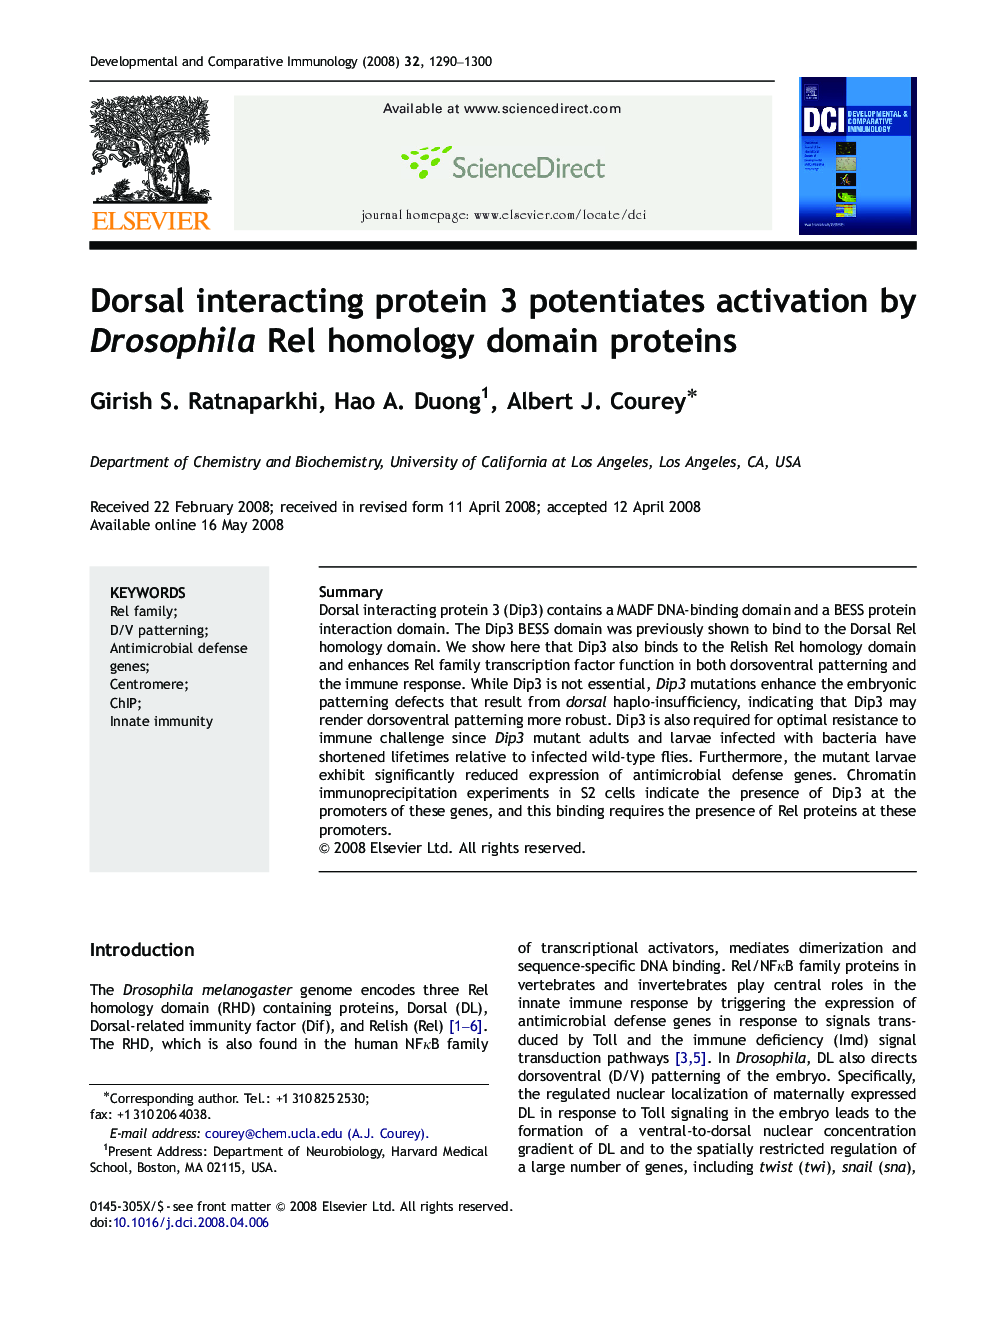 Dorsal interacting protein 3 potentiates activation by Drosophila Rel homology domain proteins